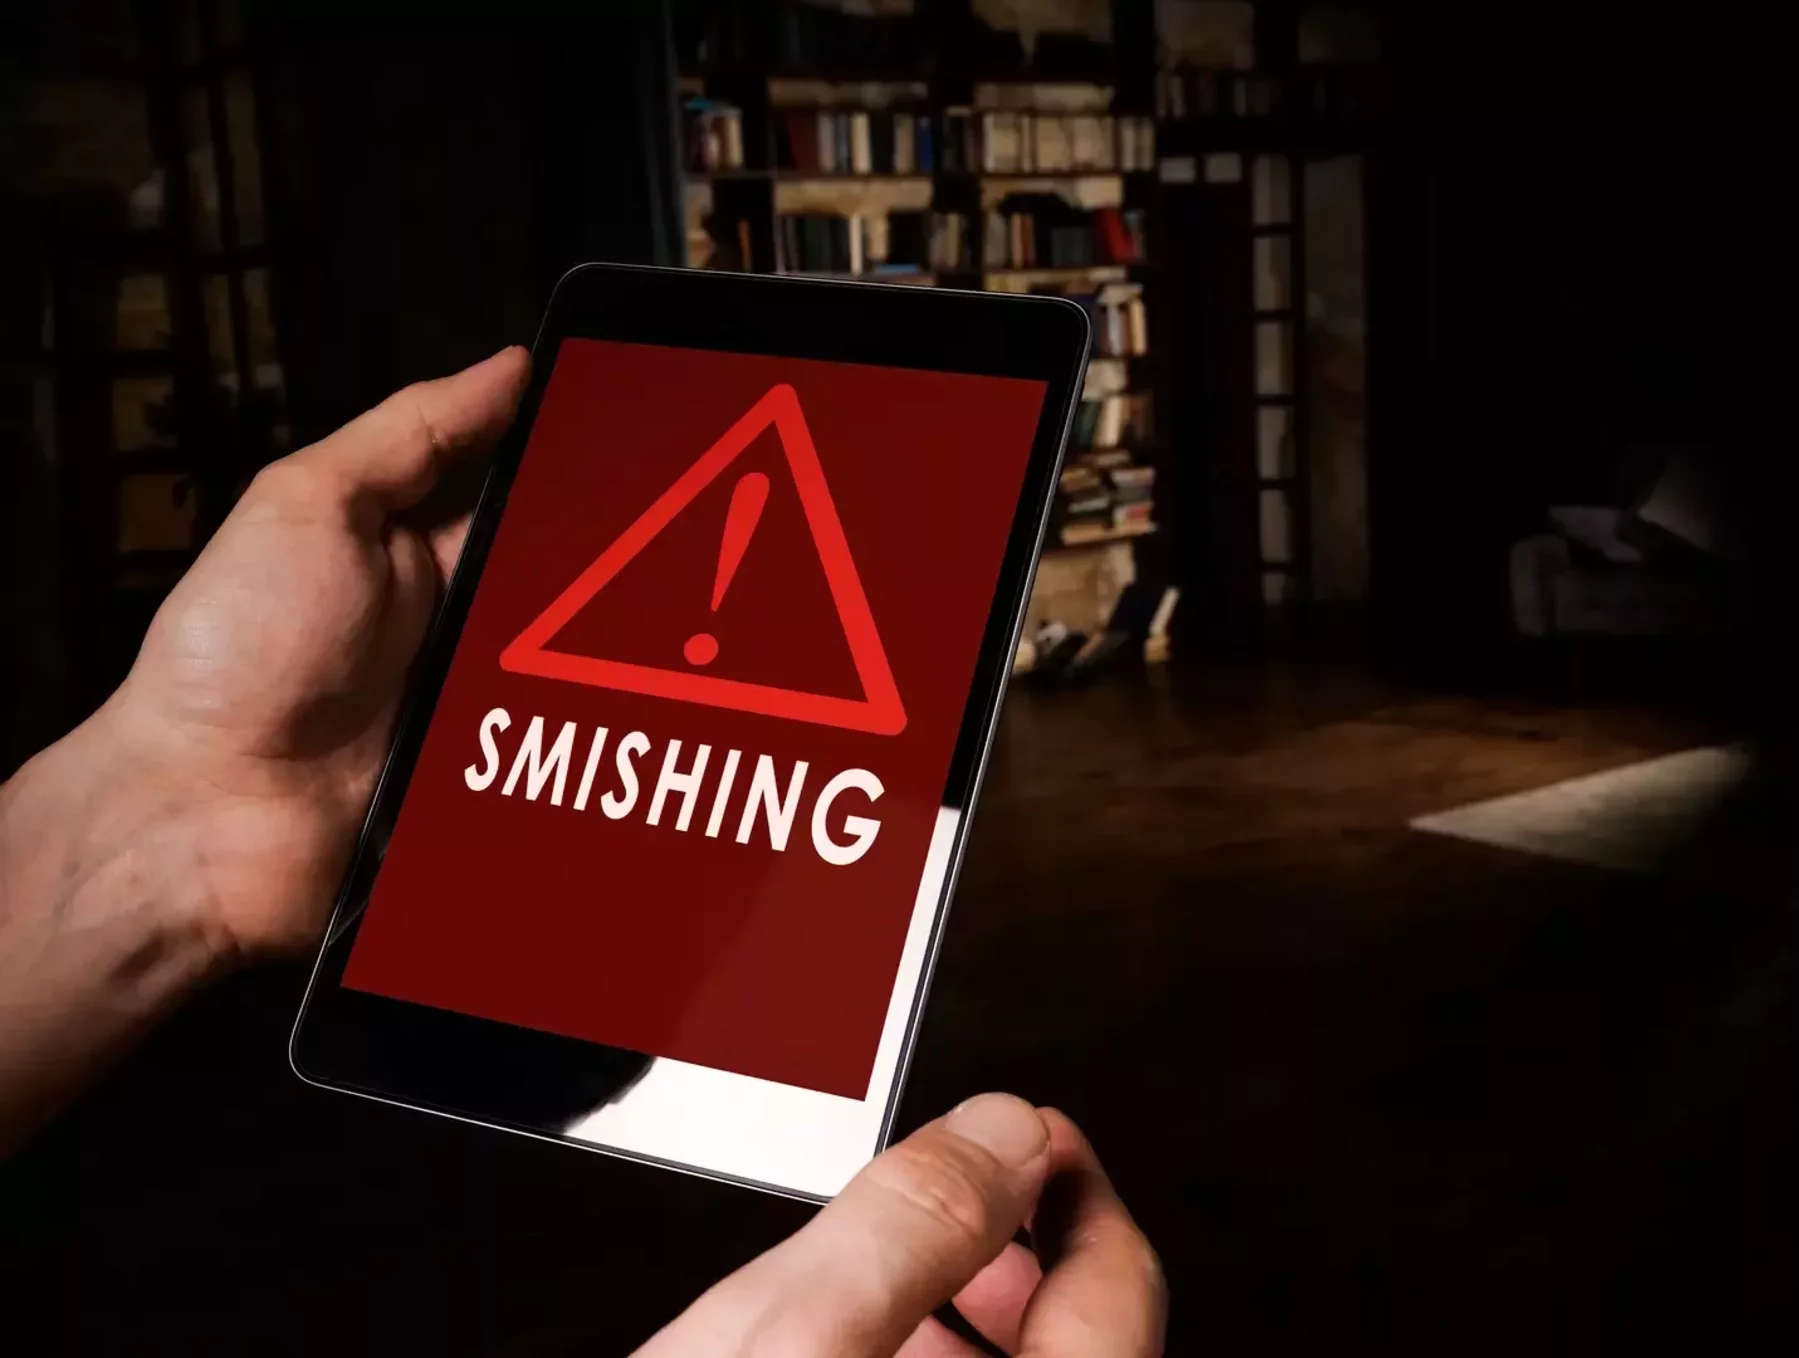 How to Guard Against Smishing Attacks on Your Phone